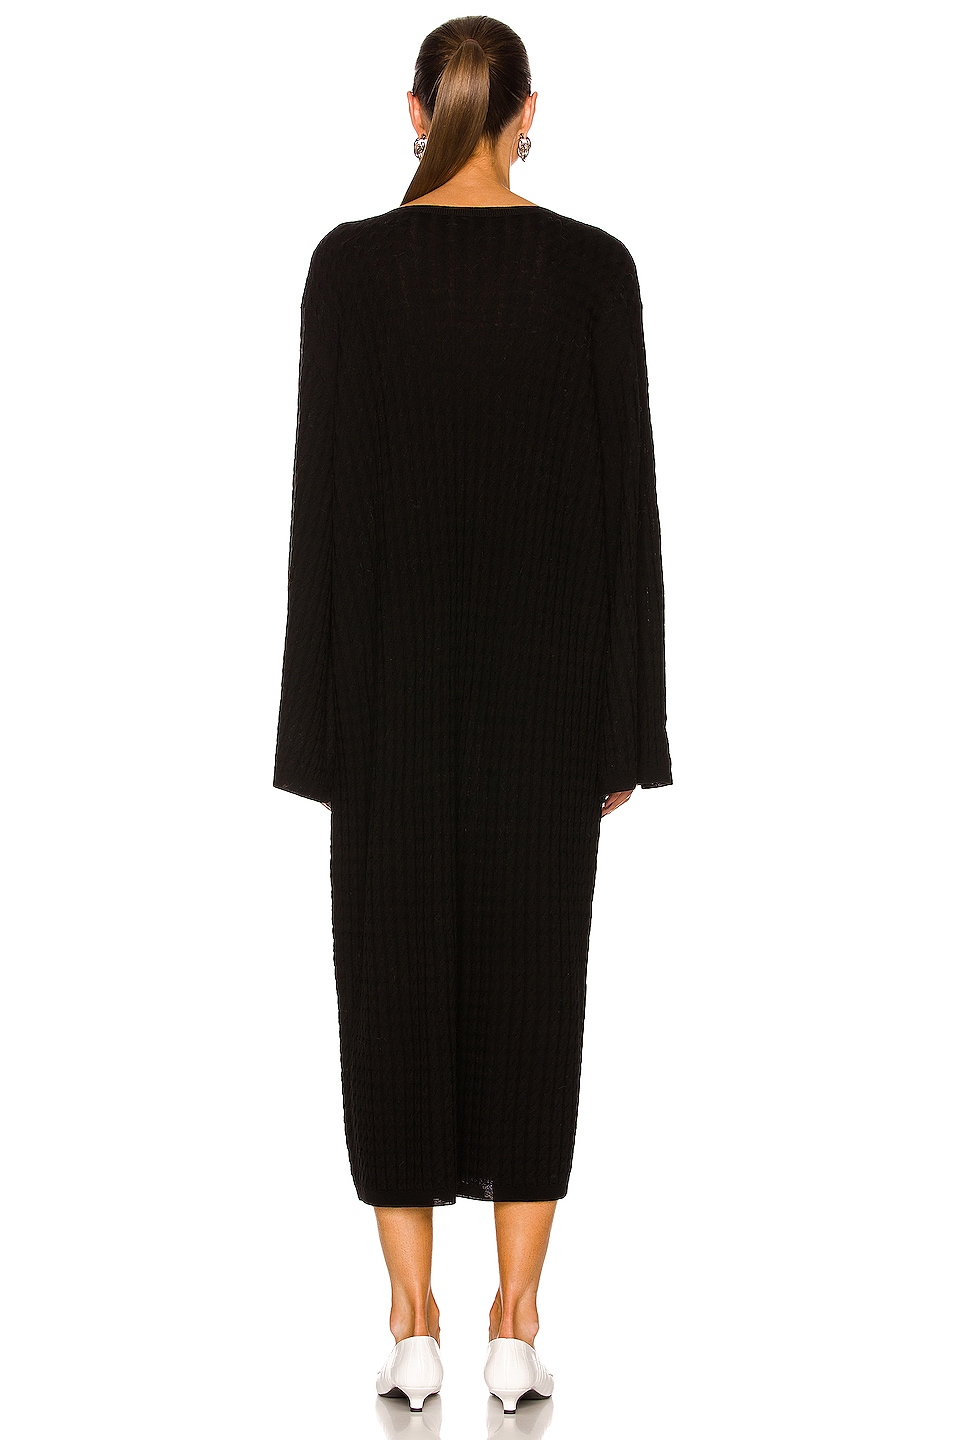 Toteme Cable Knit Dress in Black FWRD